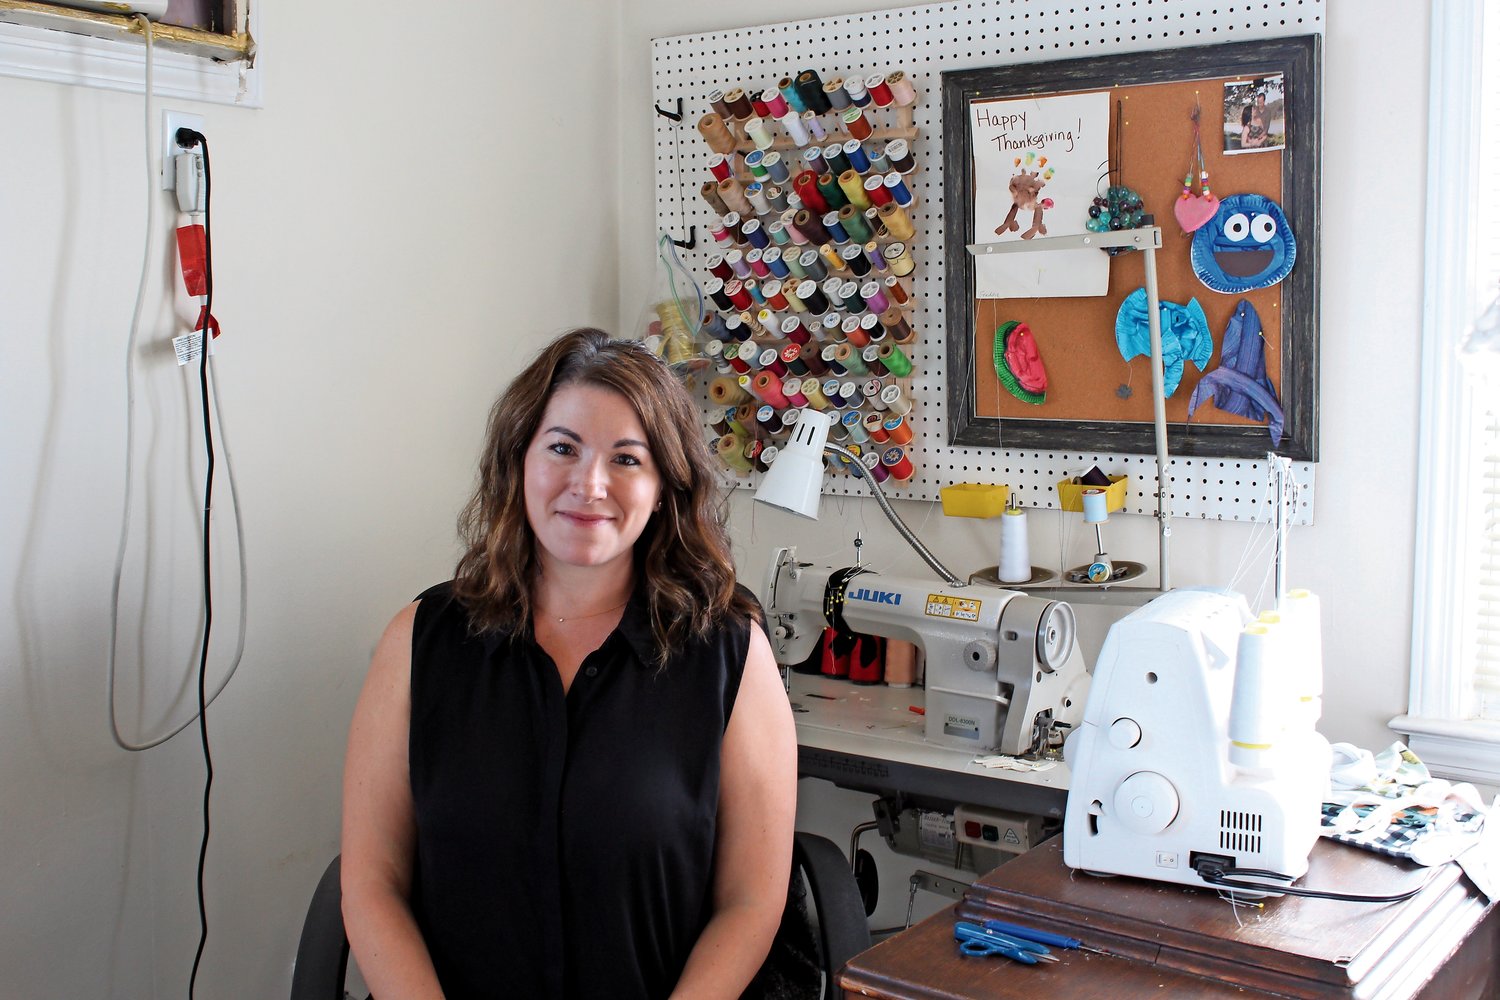 Cat Munzing, a Lynbrook native who now lives in Oceanside, is making a name for herself as a dressmaker.